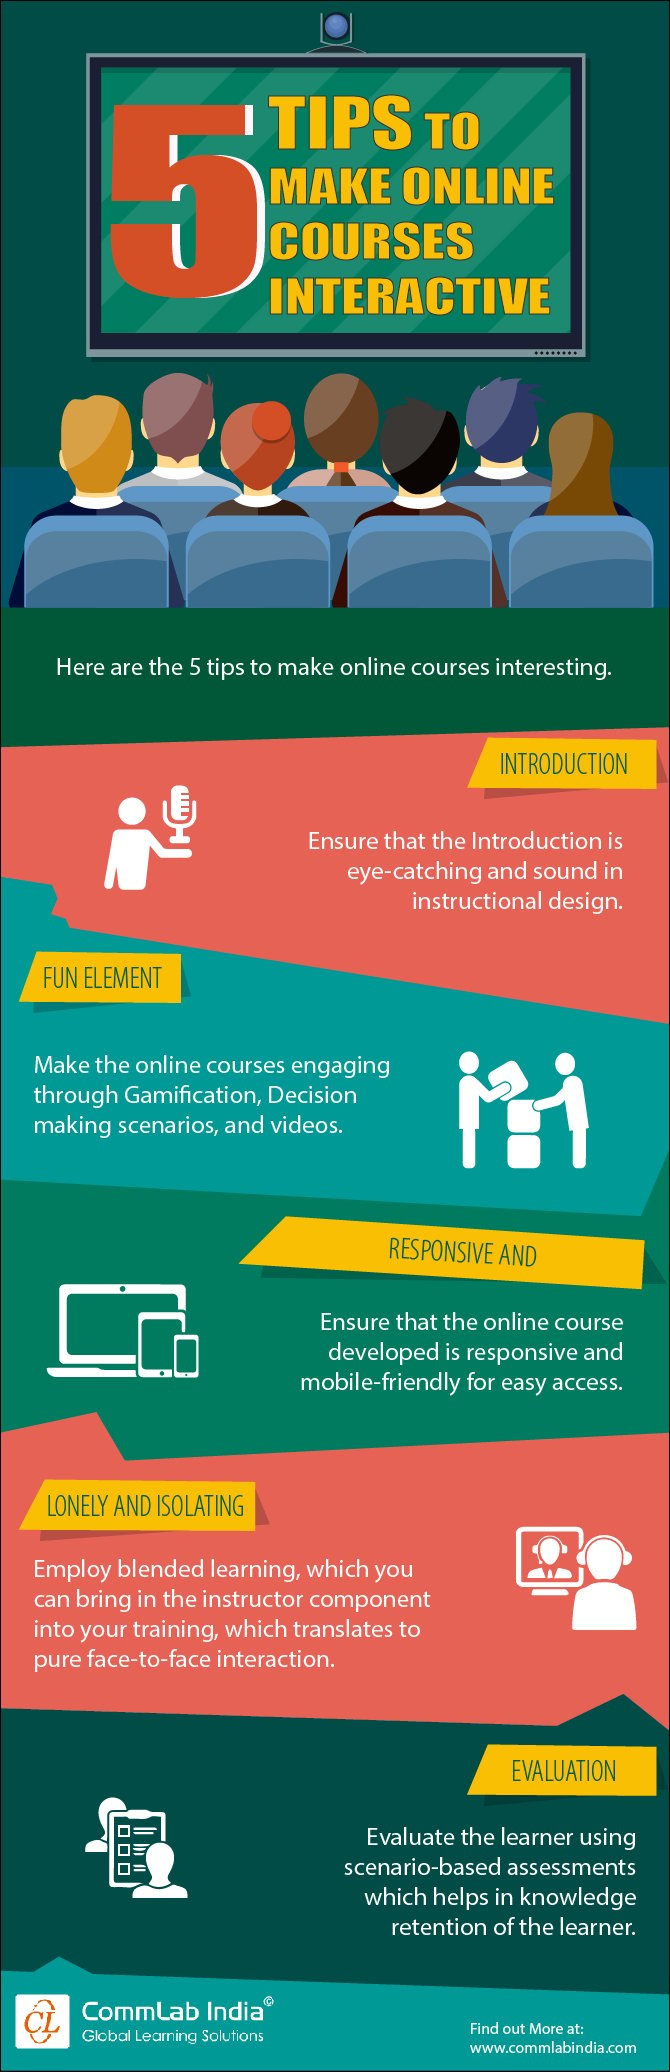 5 Tips to Make Online Courses Interactive [Infographic]